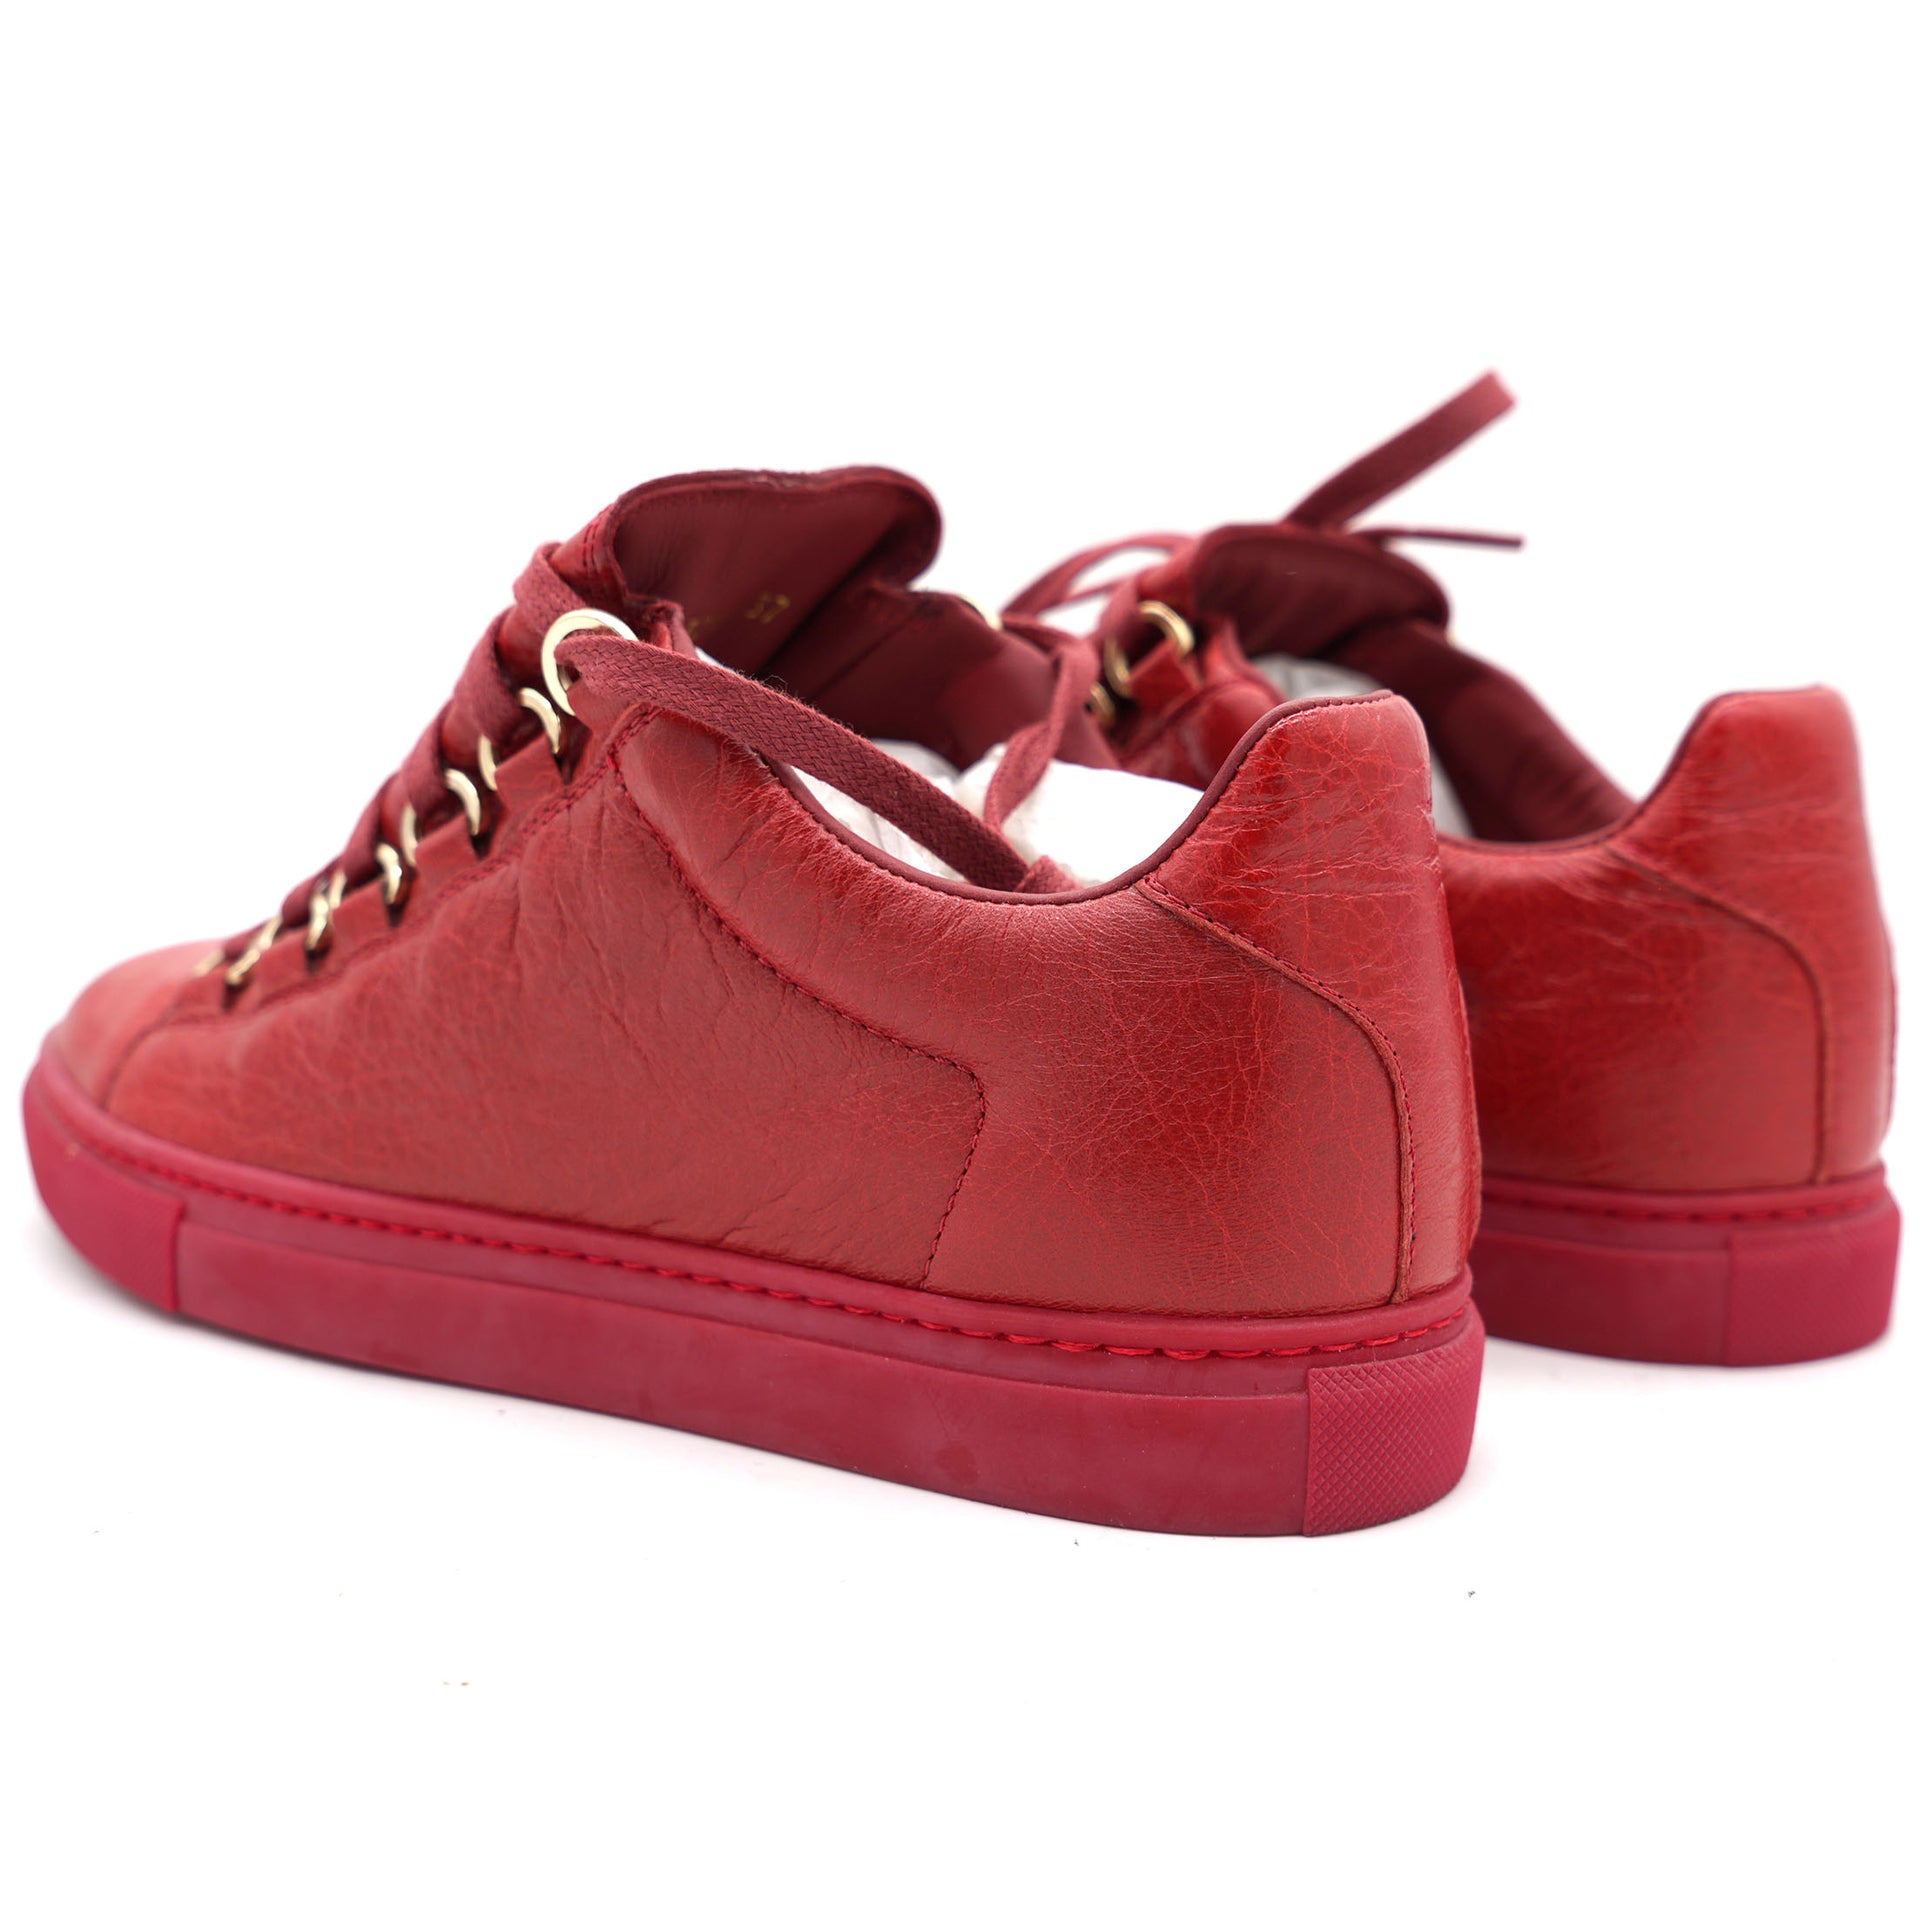 Buy Balenciaga Arena Shoes New Releases  Iconic Styles  GOAT